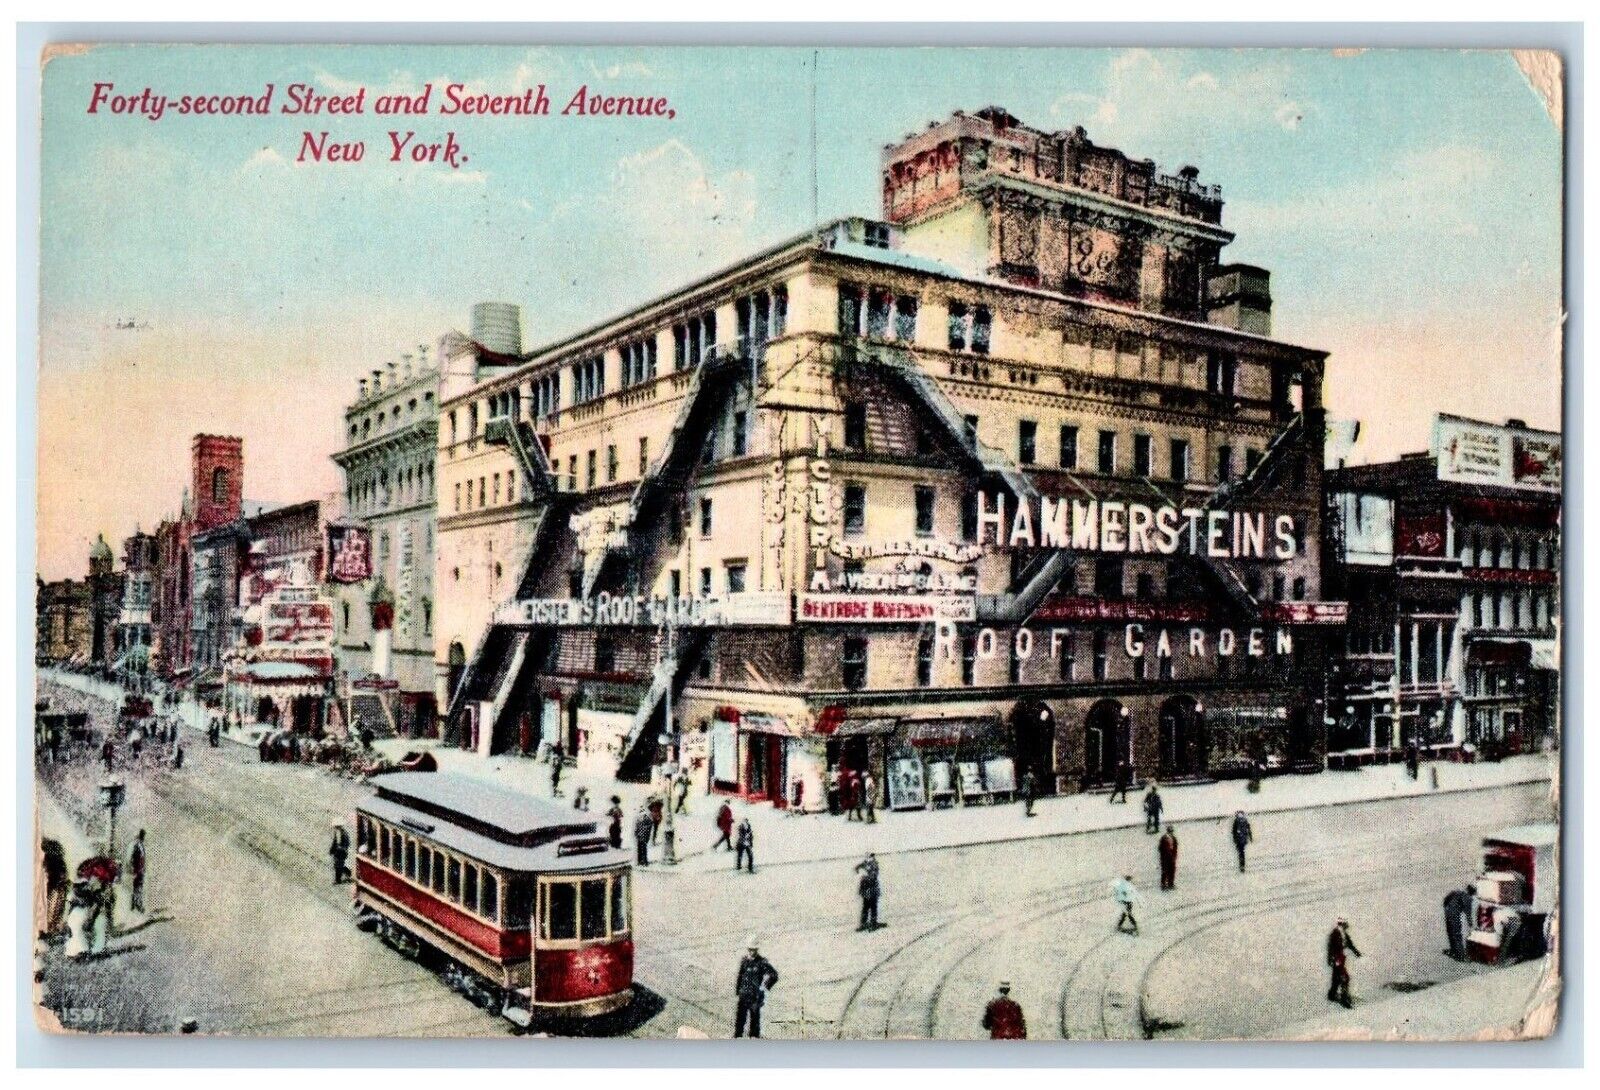 New York NY Postcard Forty Second Street And Seventh Avenue Trolley Hammersteins